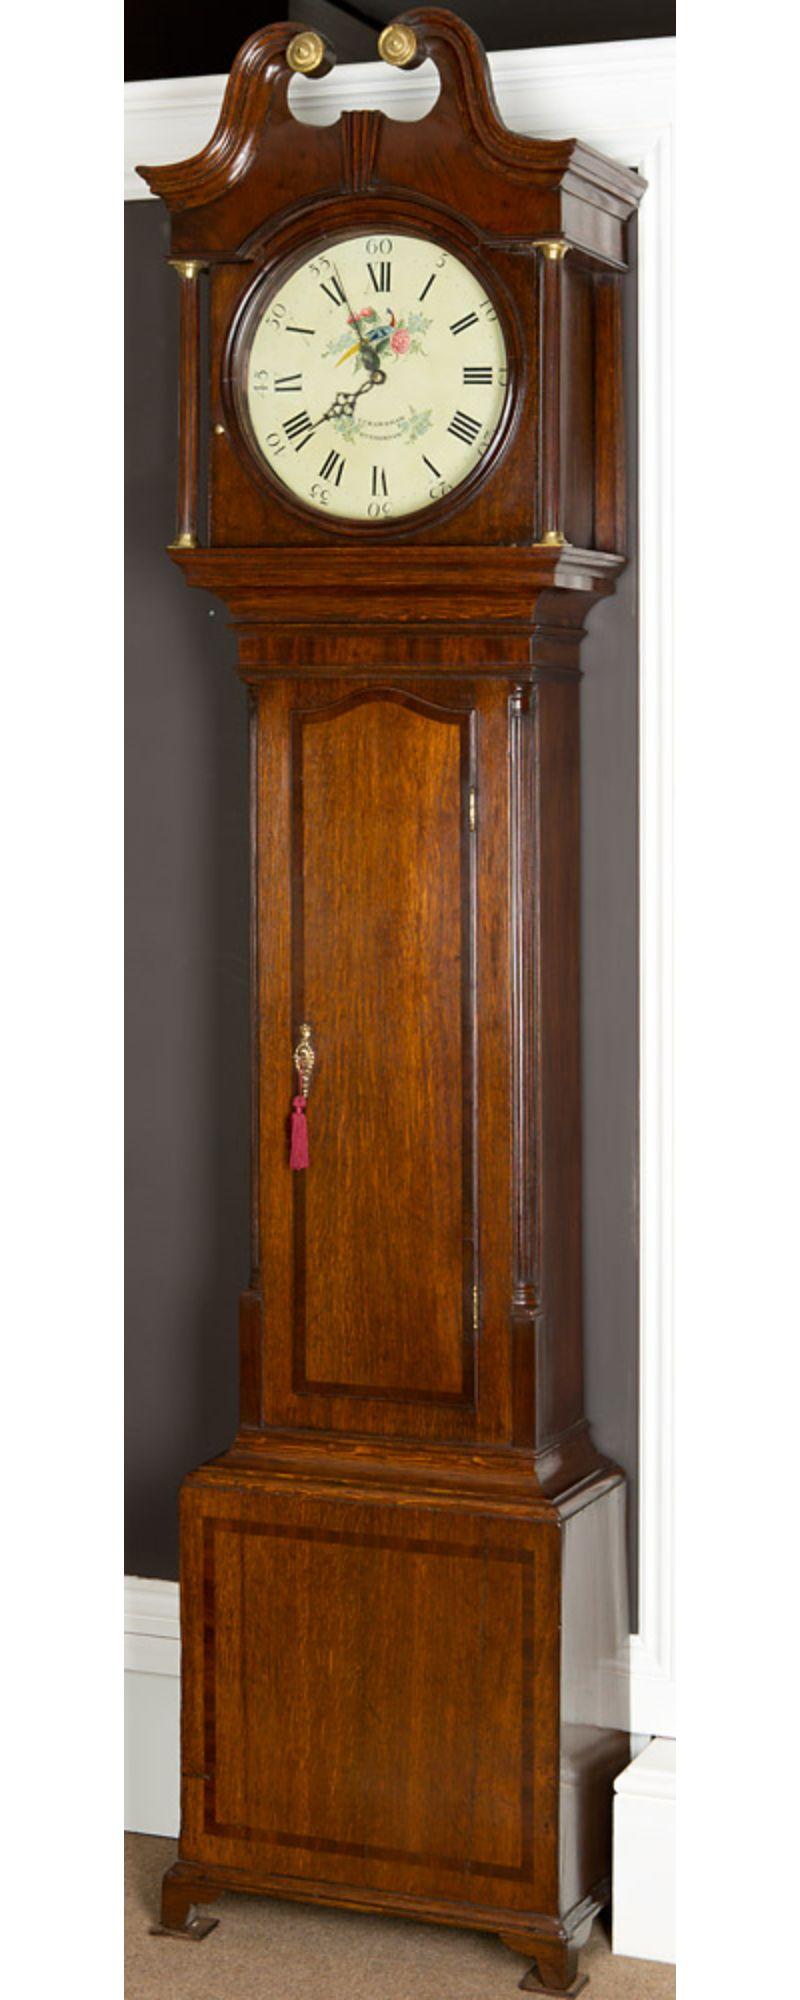 Georgian Oak and Mahogany Longcase clock.
 
The case is made from the finest English oak and crossbanded with mahogany, it has reeded canted corners either side of the trunk door also with reeded pillars either side of the hood door with brass